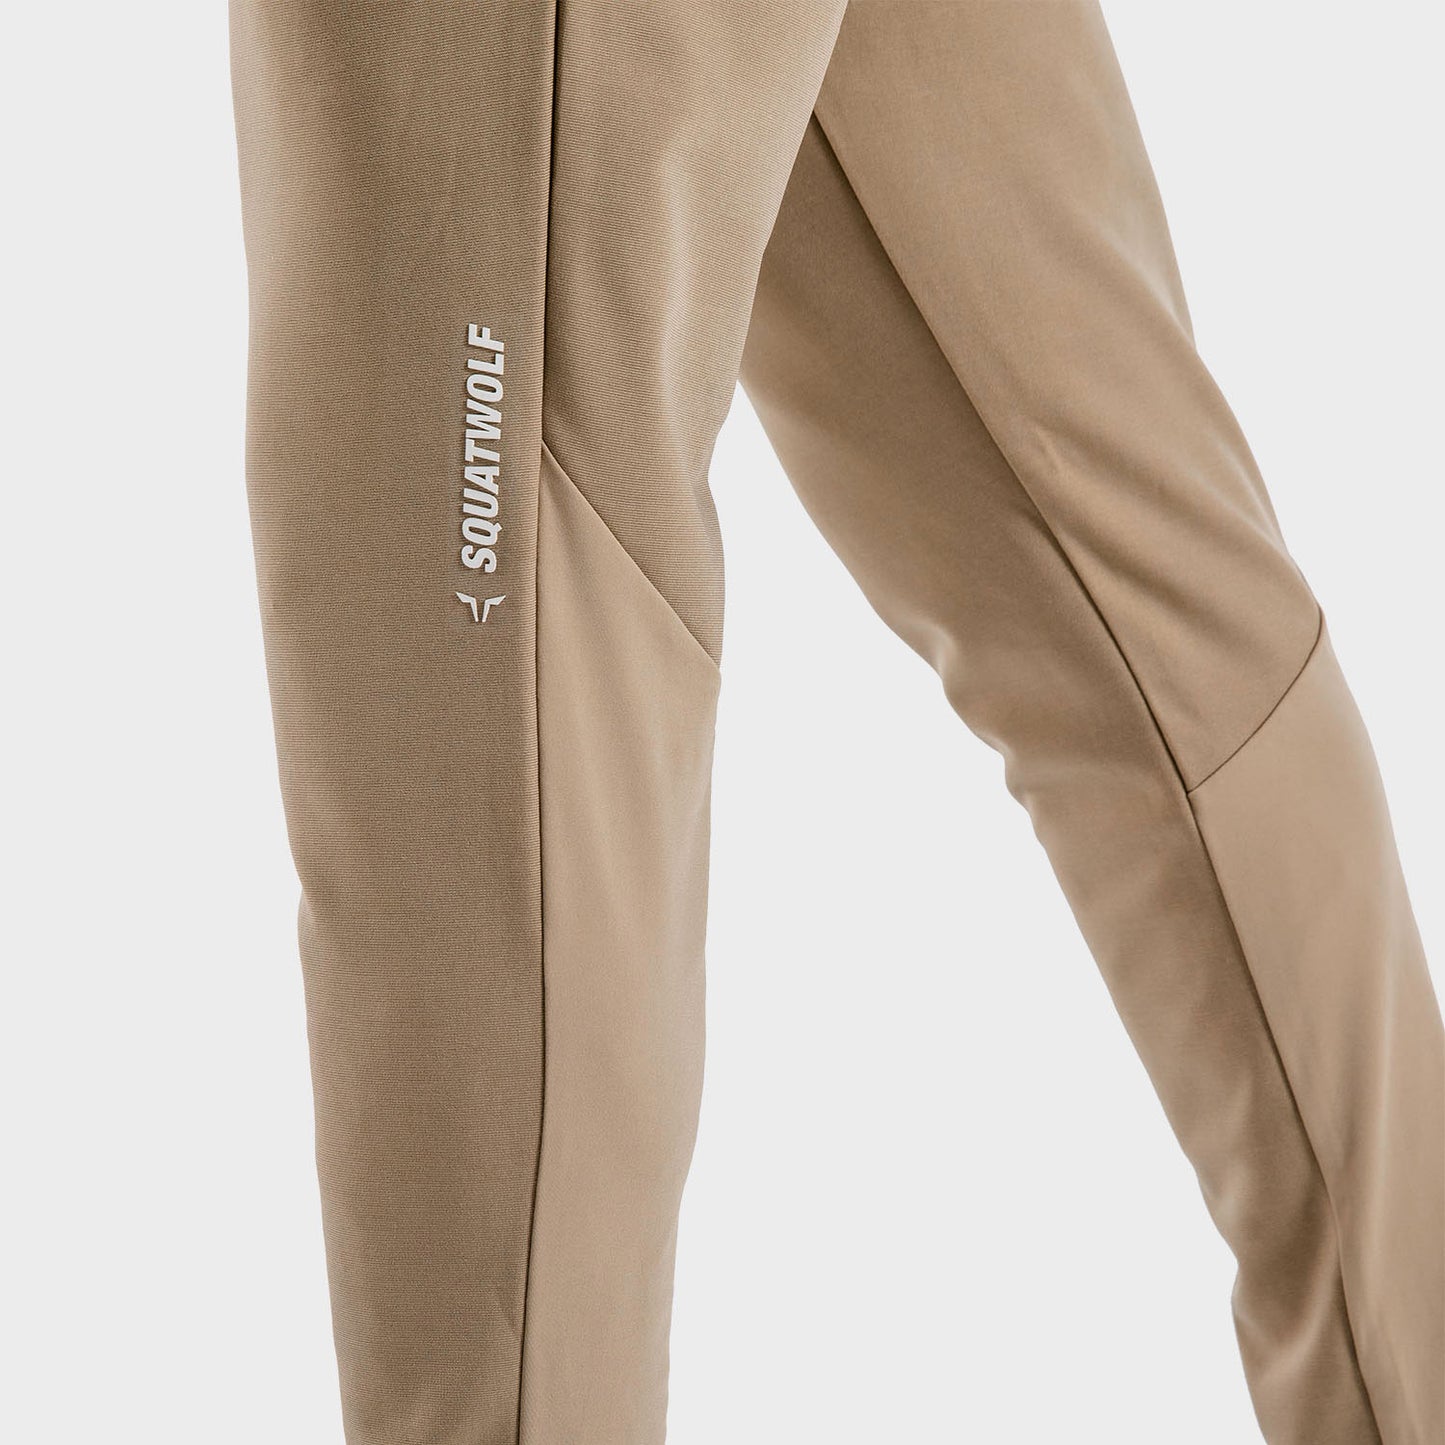 squatwolf-workout-pants-for-men-flux-joggers-taupe-gym-wear